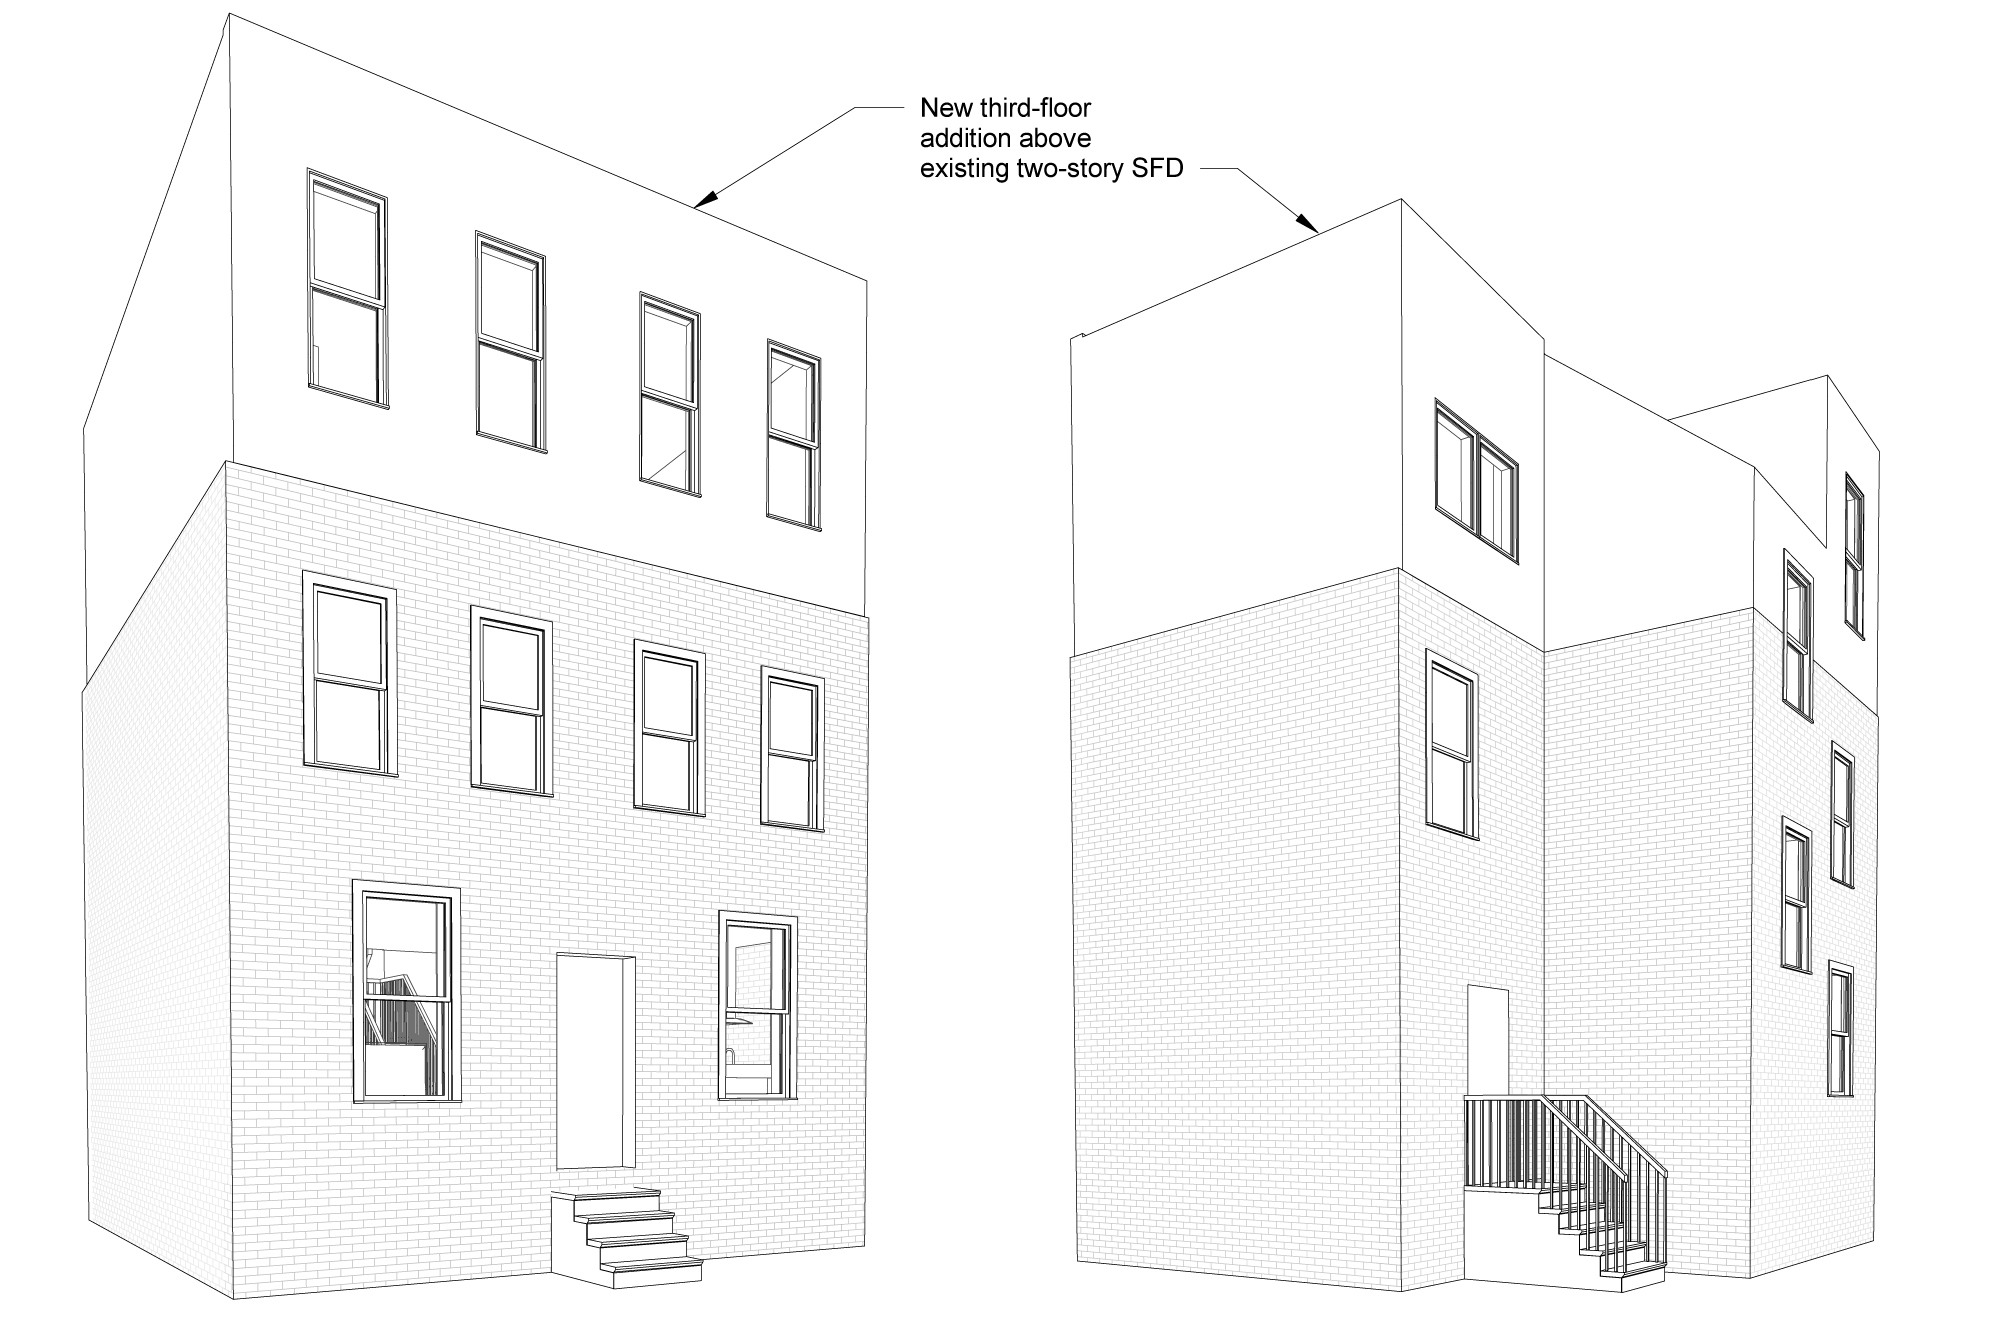 Rough front and rear views of the finished house, from during preliminary design.